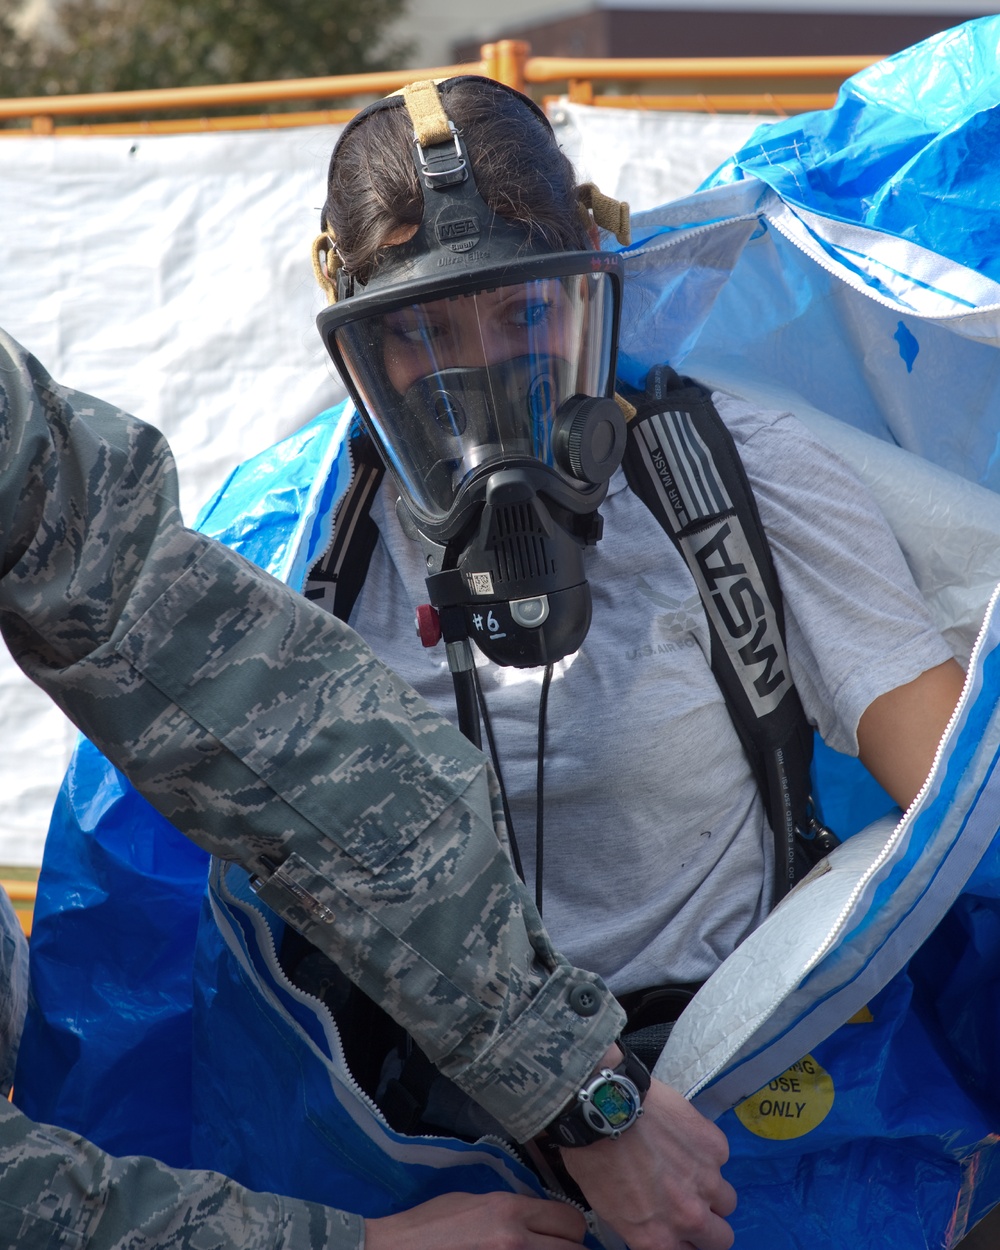 374th CES tests for CBRN agents during medical exercise